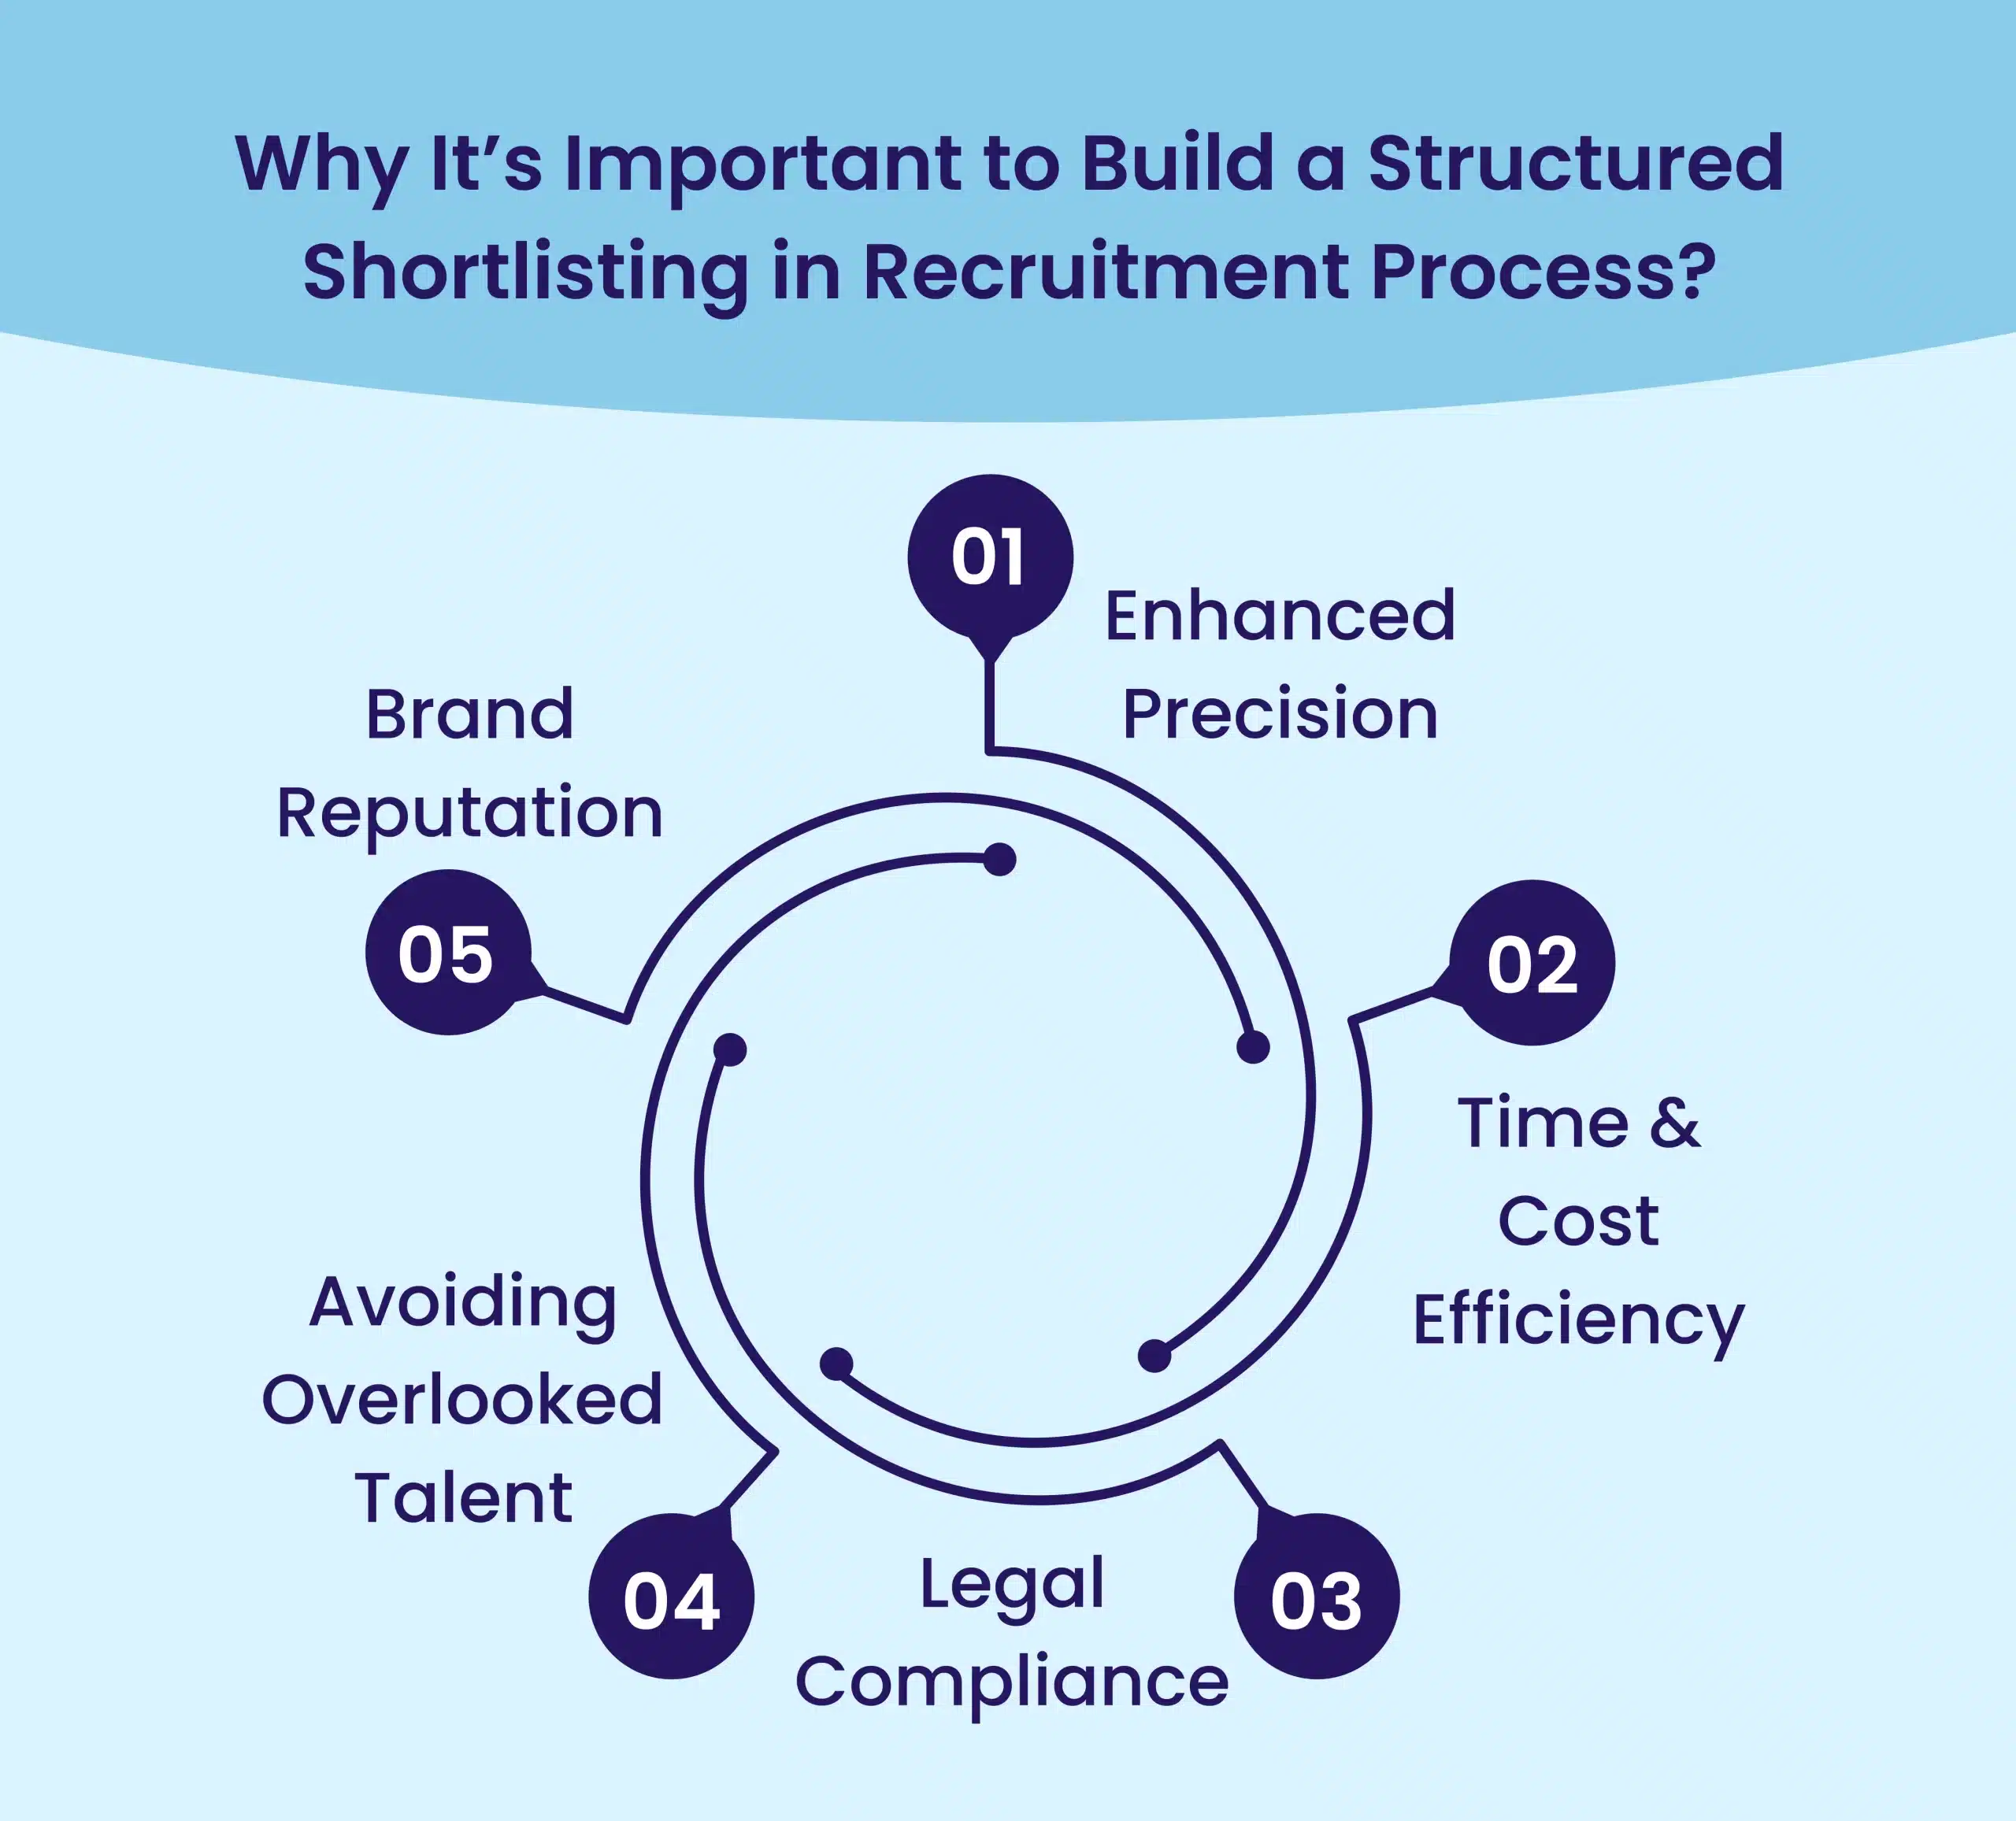 Why It’s Important to Build a Structured Shortlisting in Recruitment Process